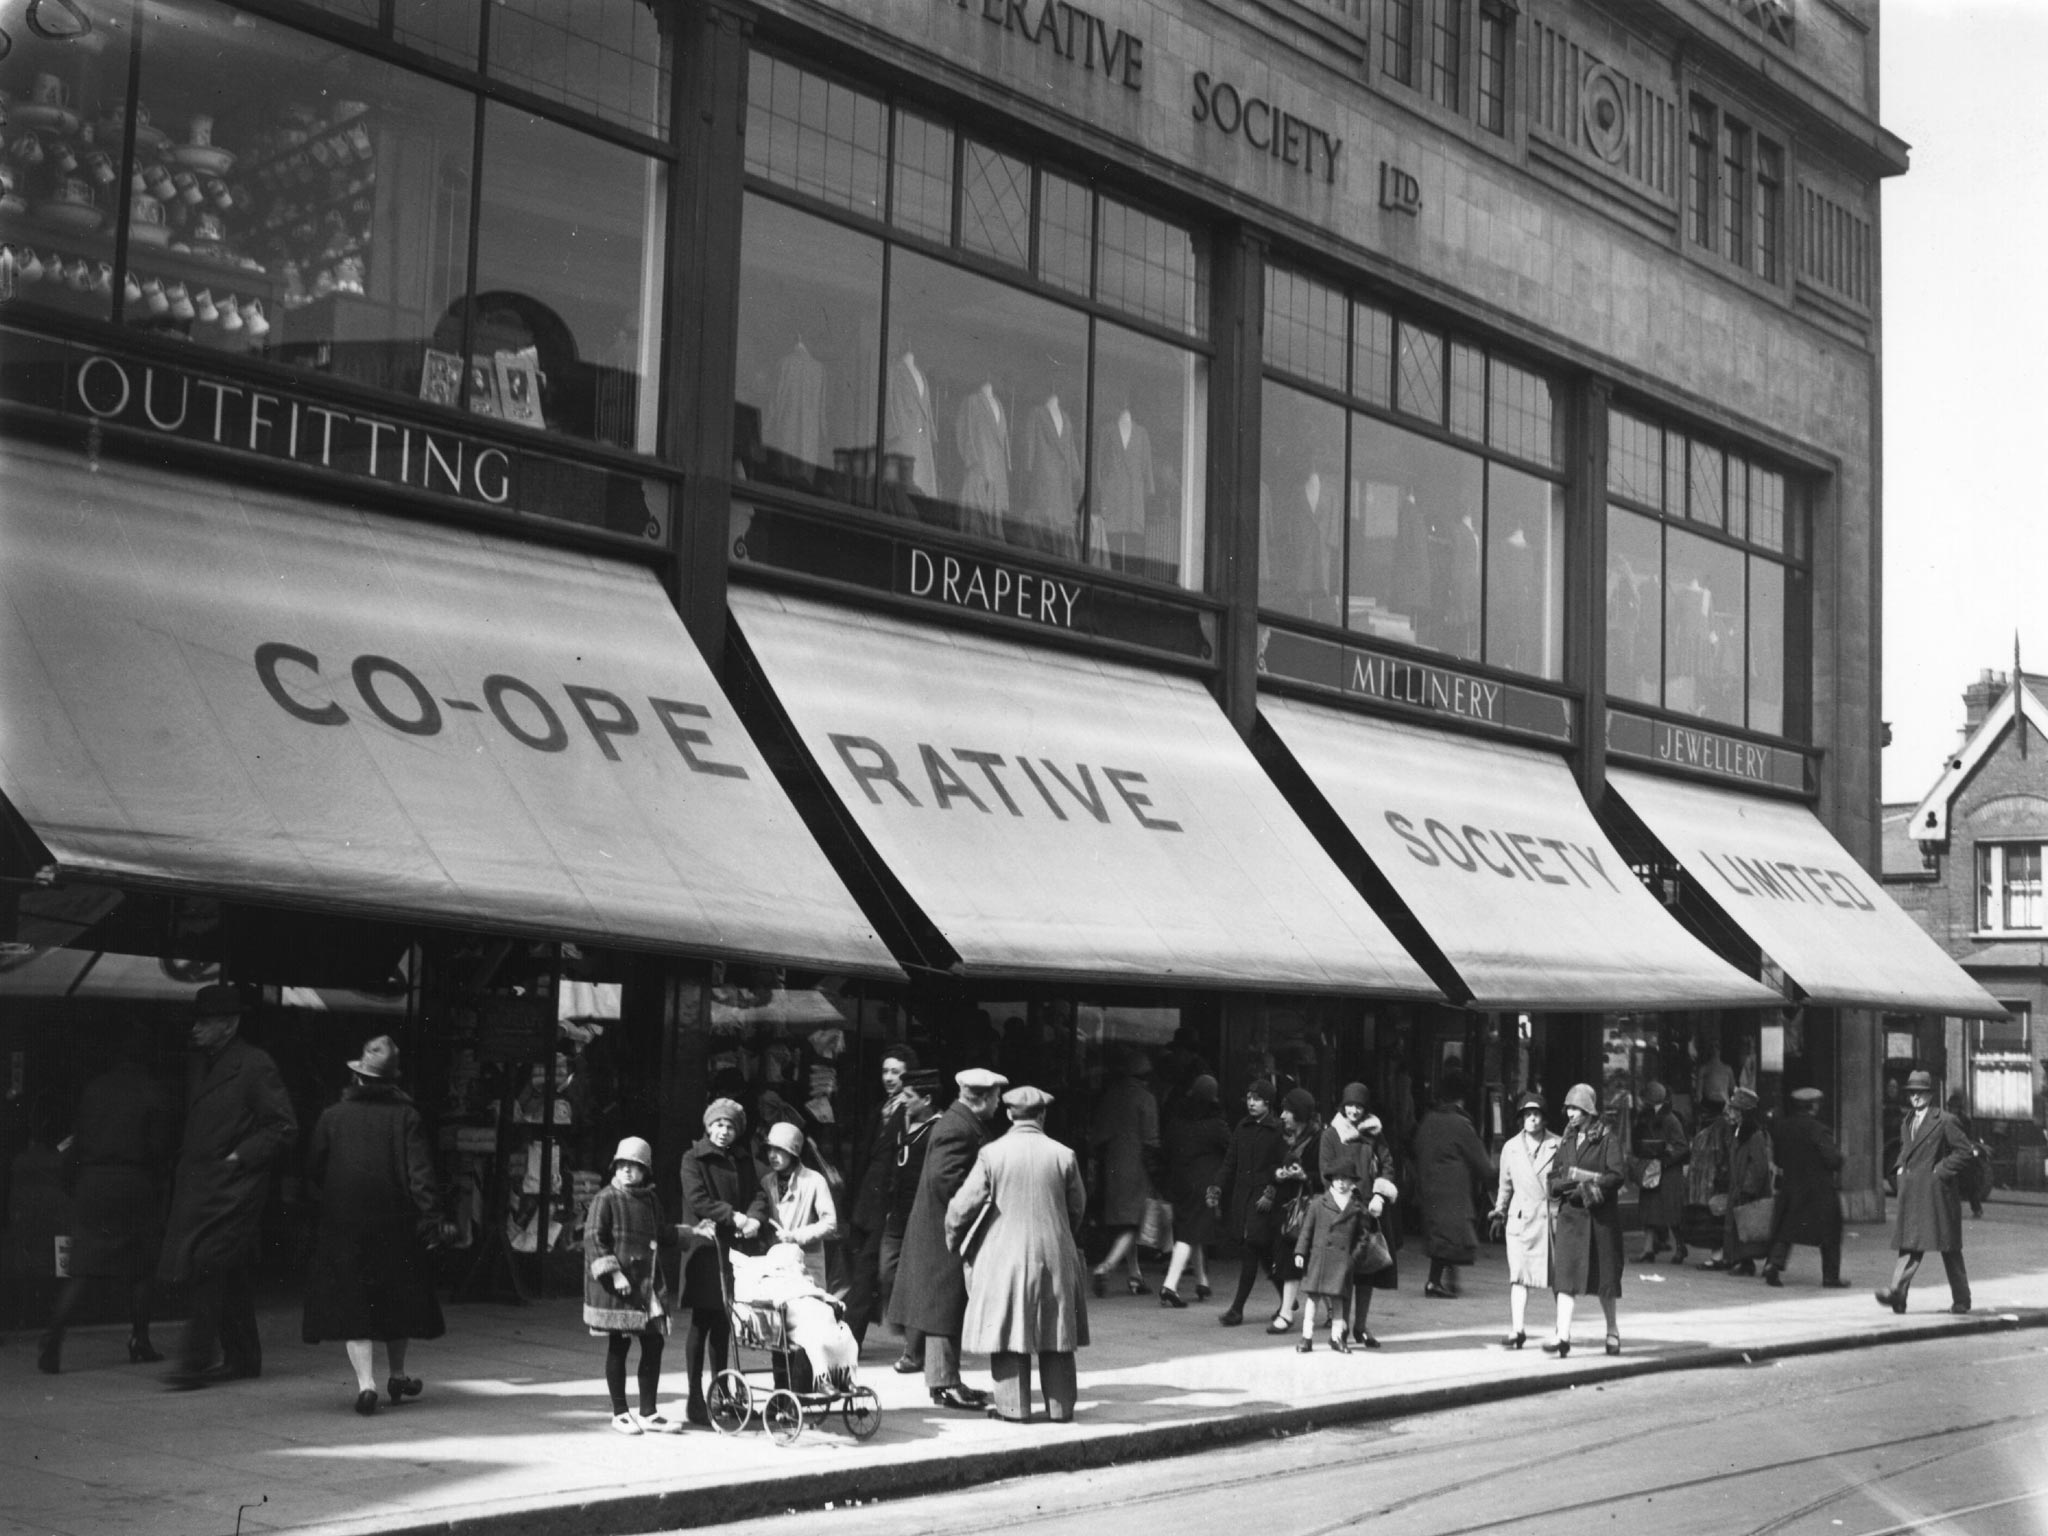 A Co-op in east London in 1929: it wants to know how it can best
serve its communities now